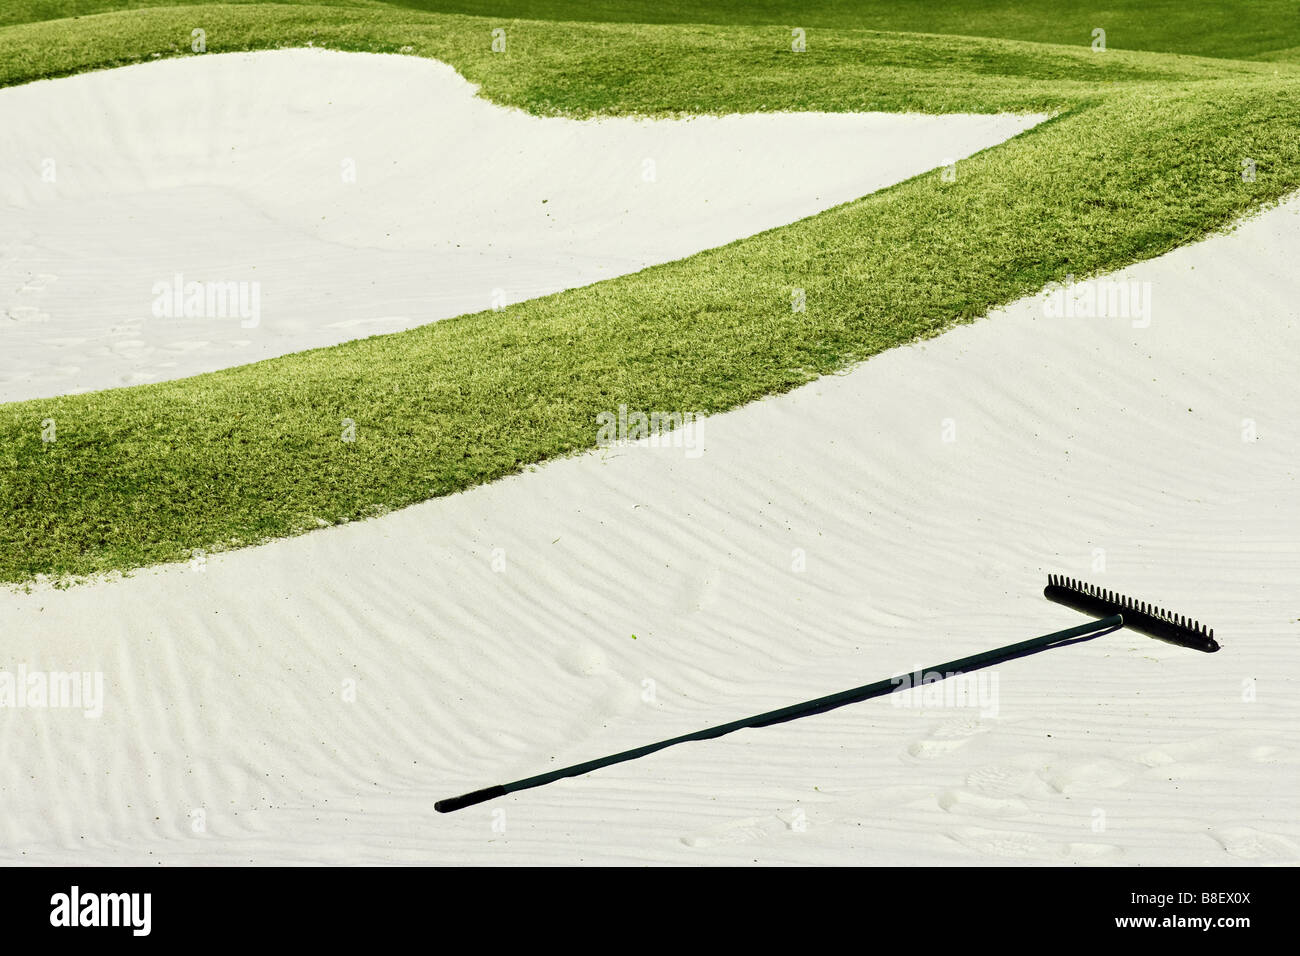 sand trap and green grass on golf course Stock Photo